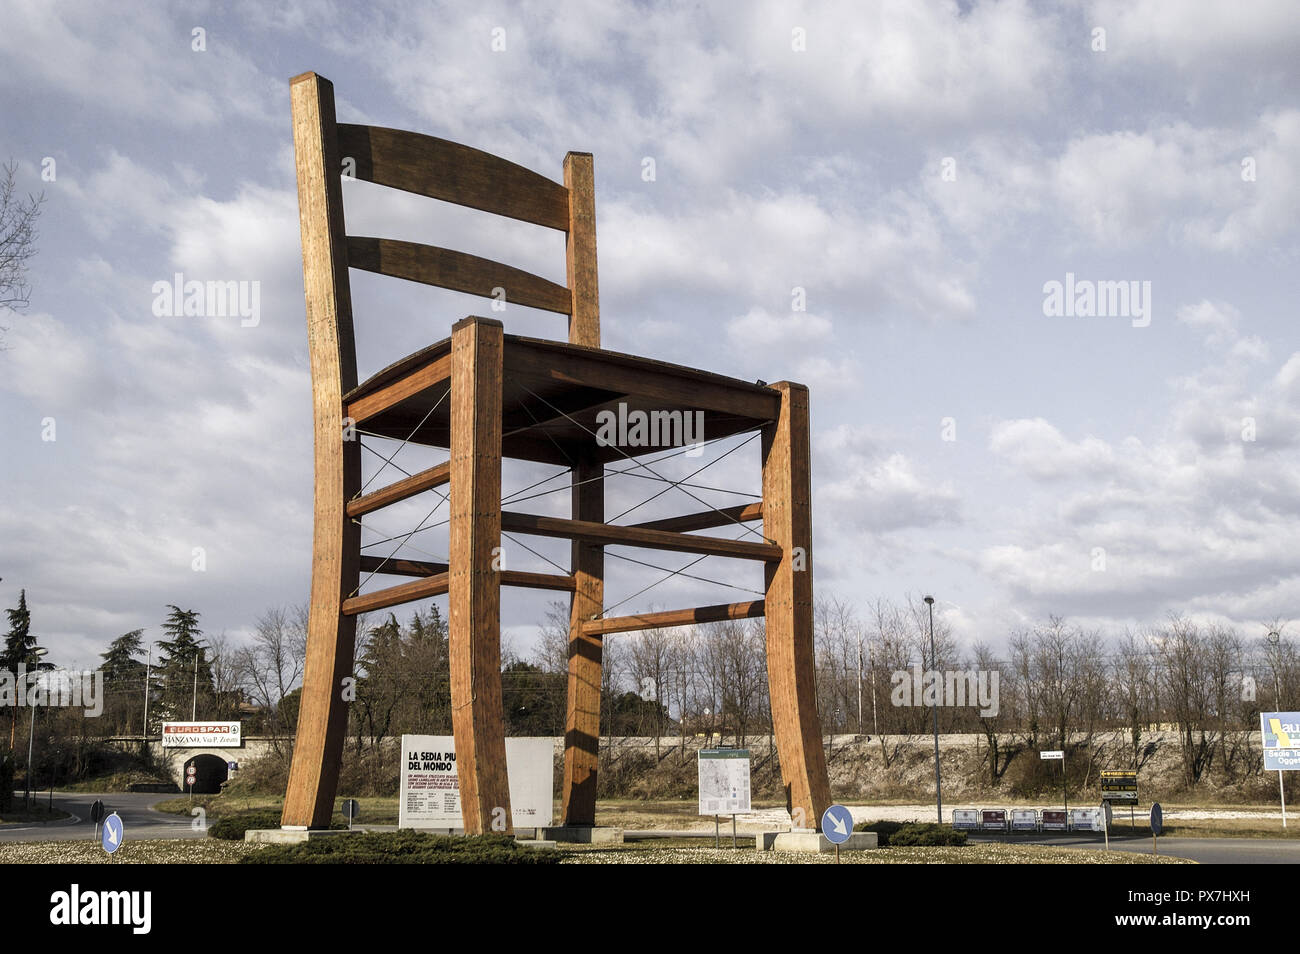 The Biggest Chair Of The World Symbol For Furniture Desing In